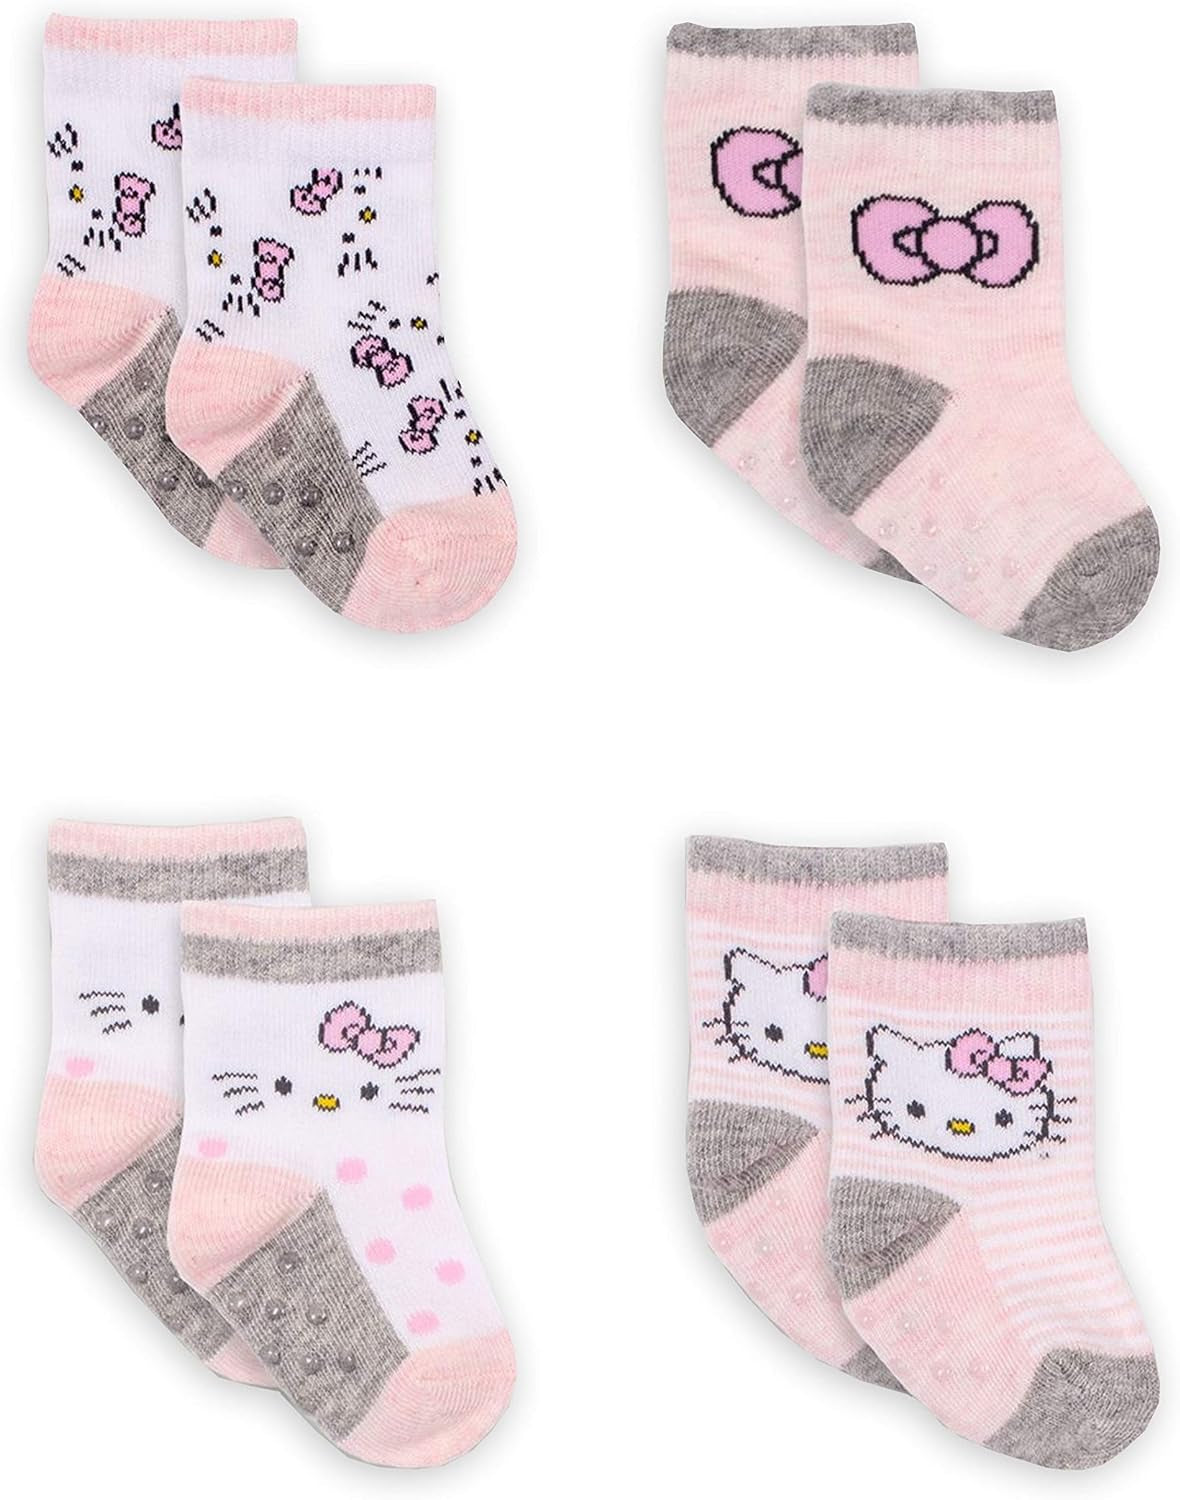 Hello Kitty Socks Girls Kids Toddler Baby Assorted Styles (Ages 12-24 Months, Baby Girls 4 Pack)